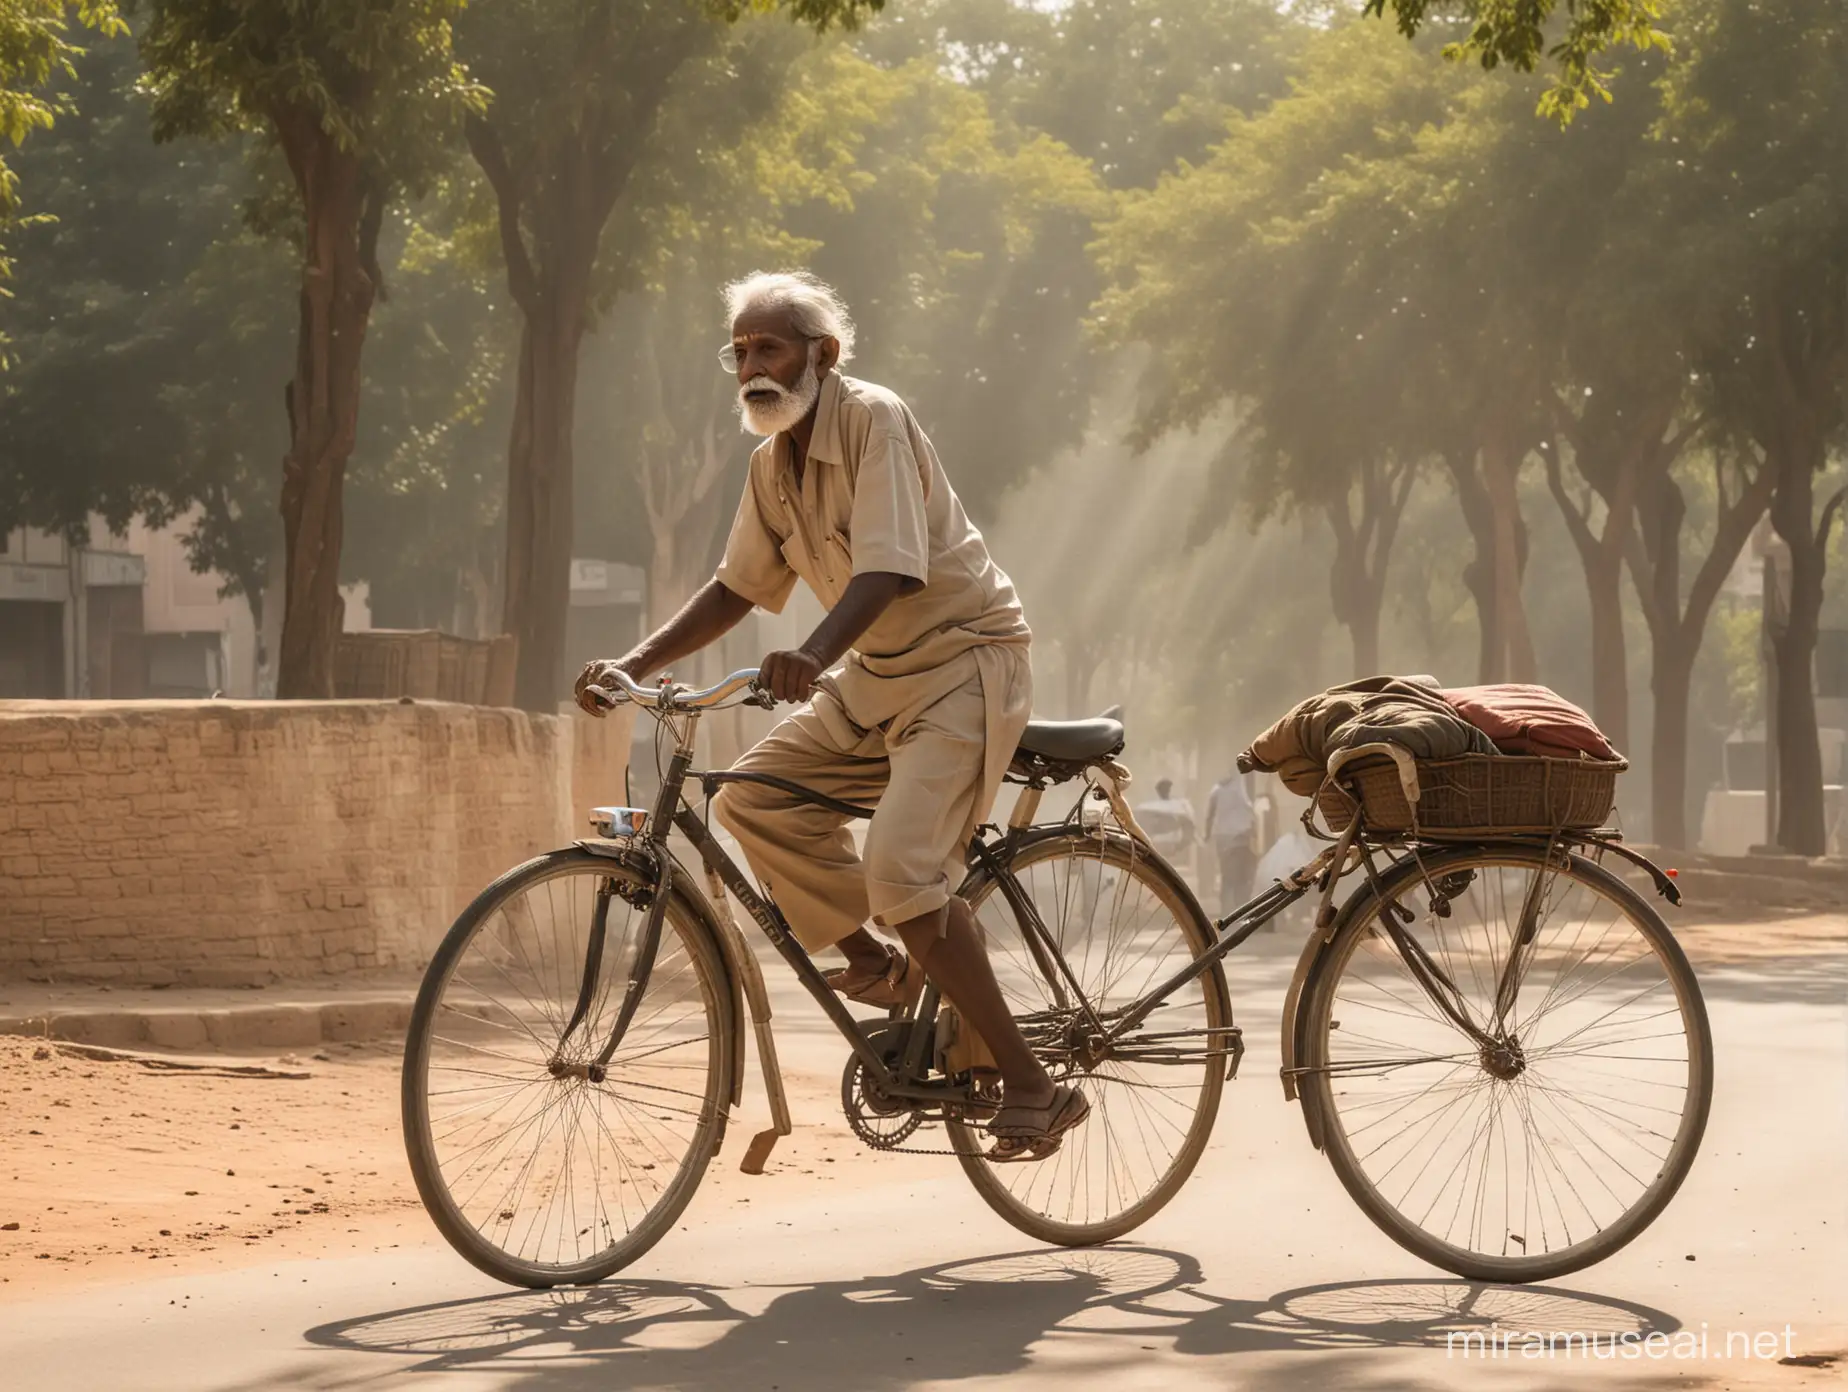 Elderly Indian Man Braving the Heat on Bicycle Journey